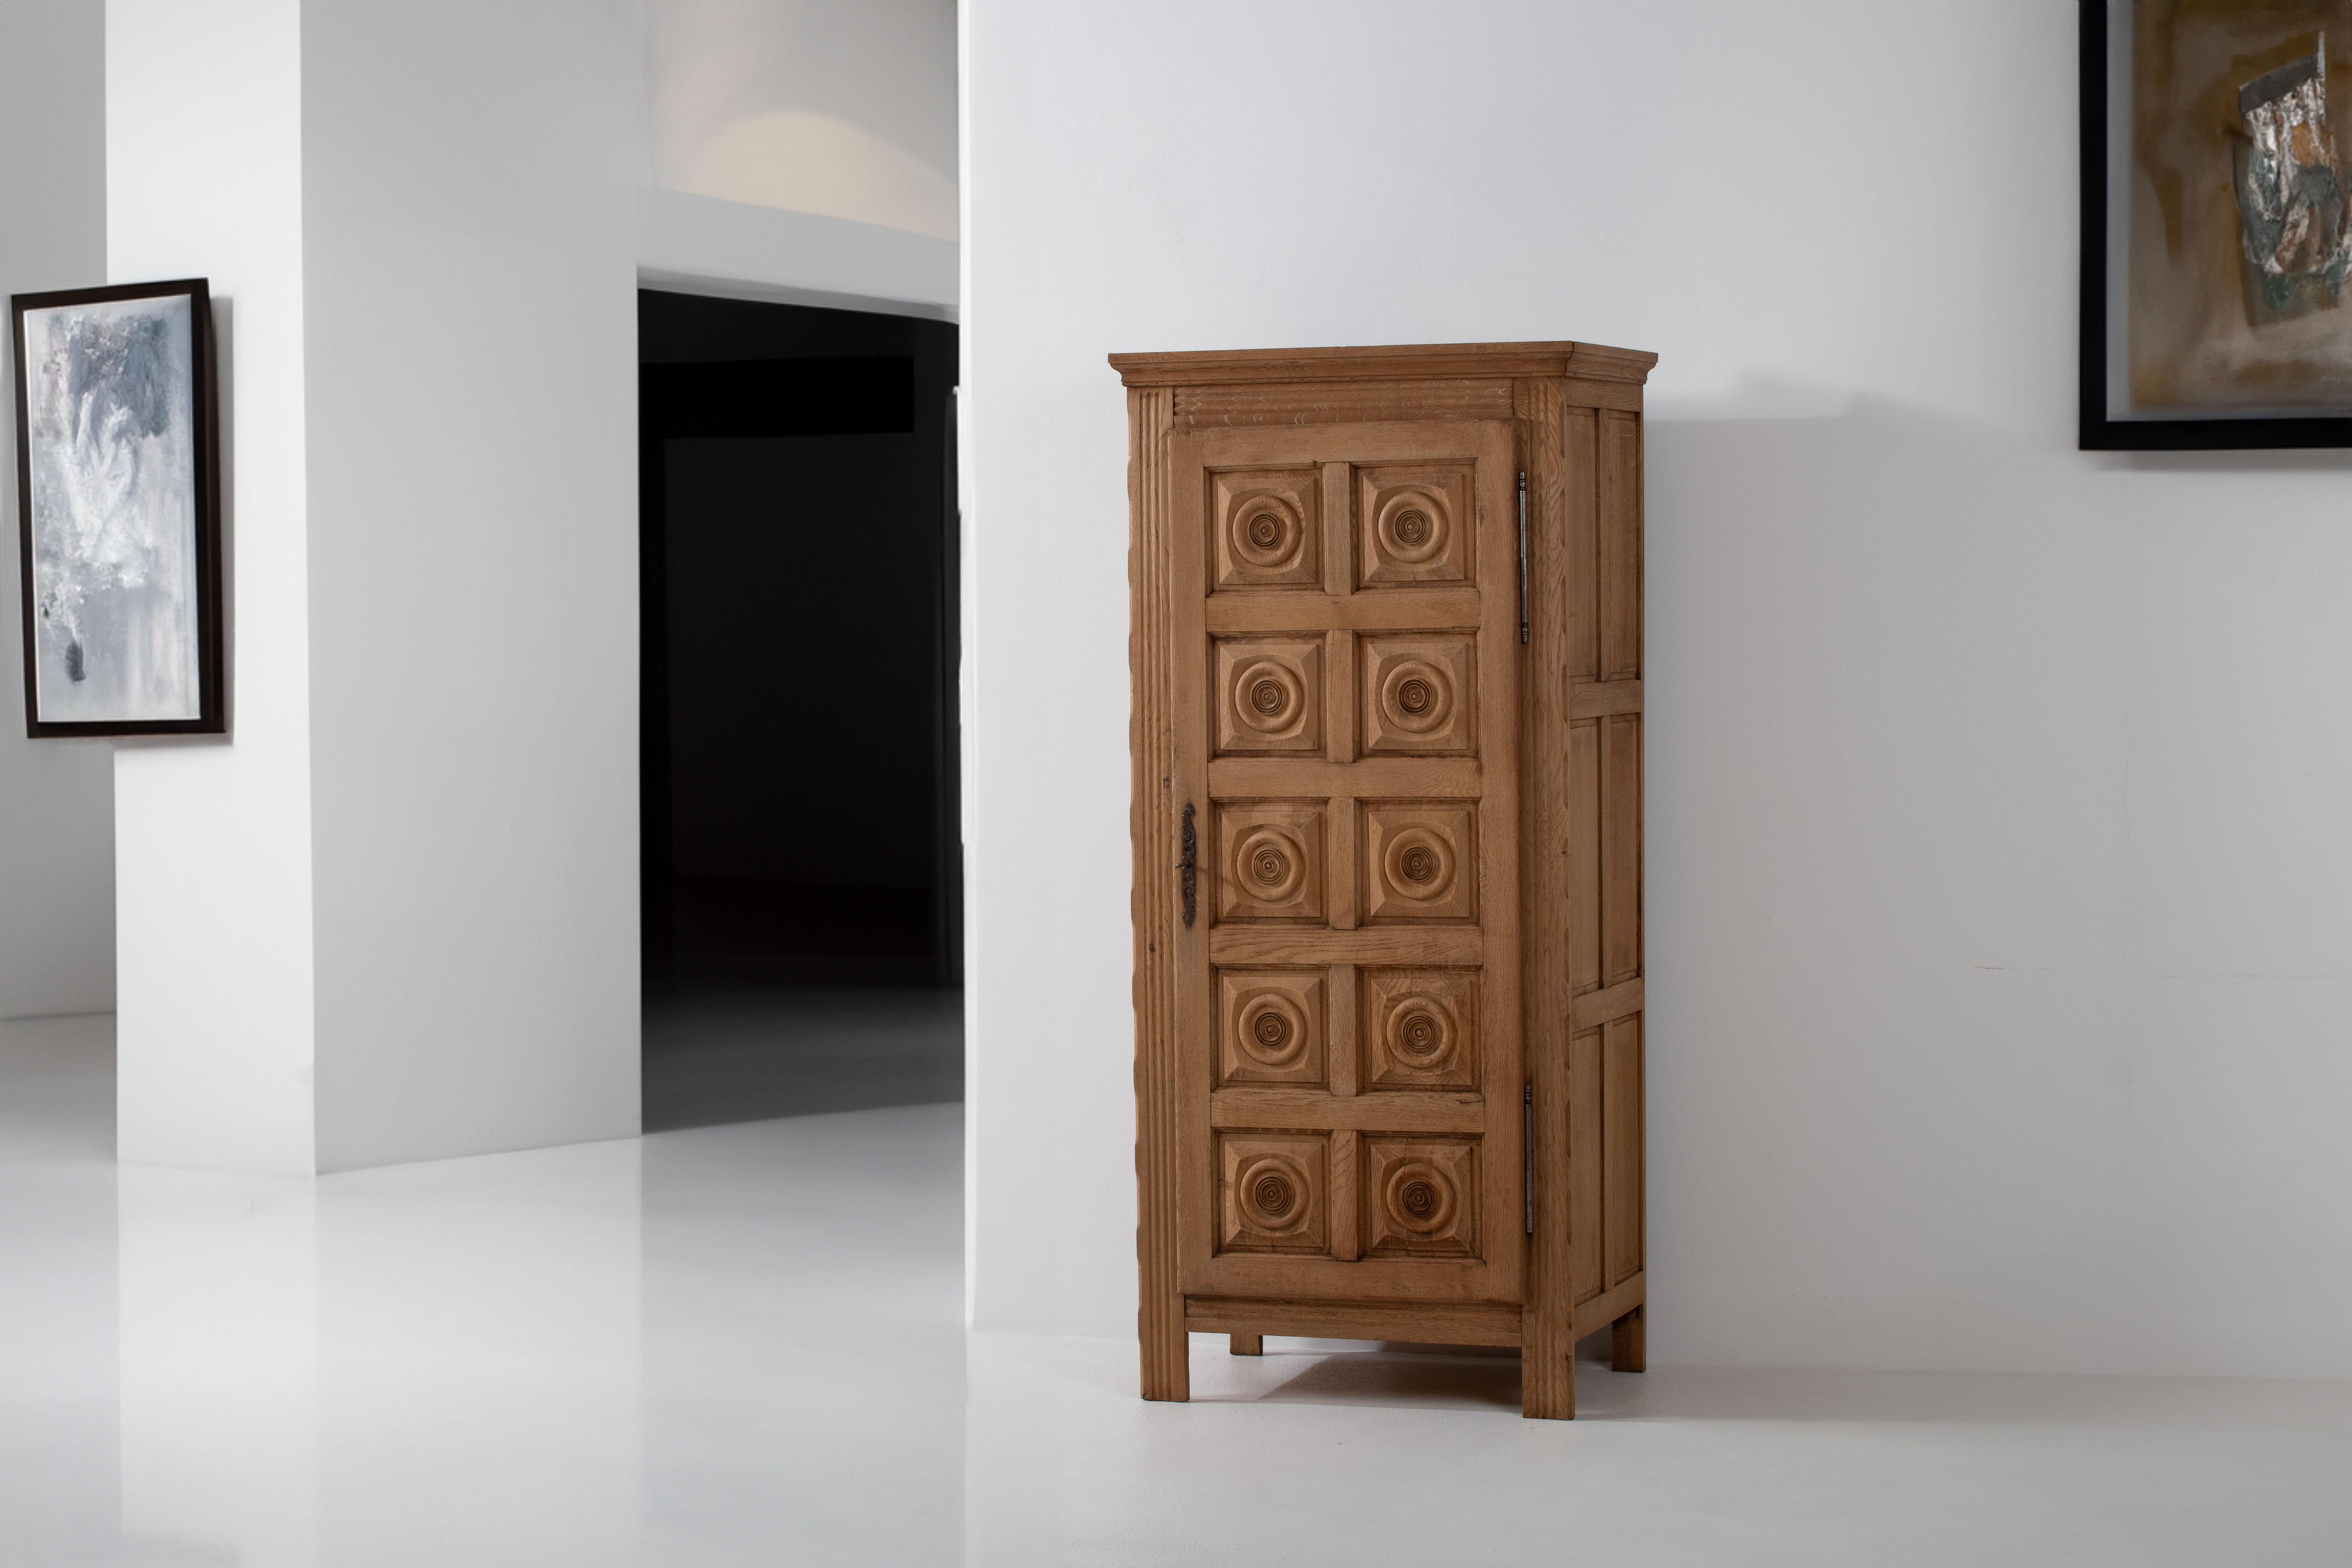 Presenting a beautifully crafted oak wardrobe, an homage to the iconic style of Charles Dudouyt, a prominent figure in French furniture design. This piece hails from the 1950s, encapsulating the enduring charm of mid-century French